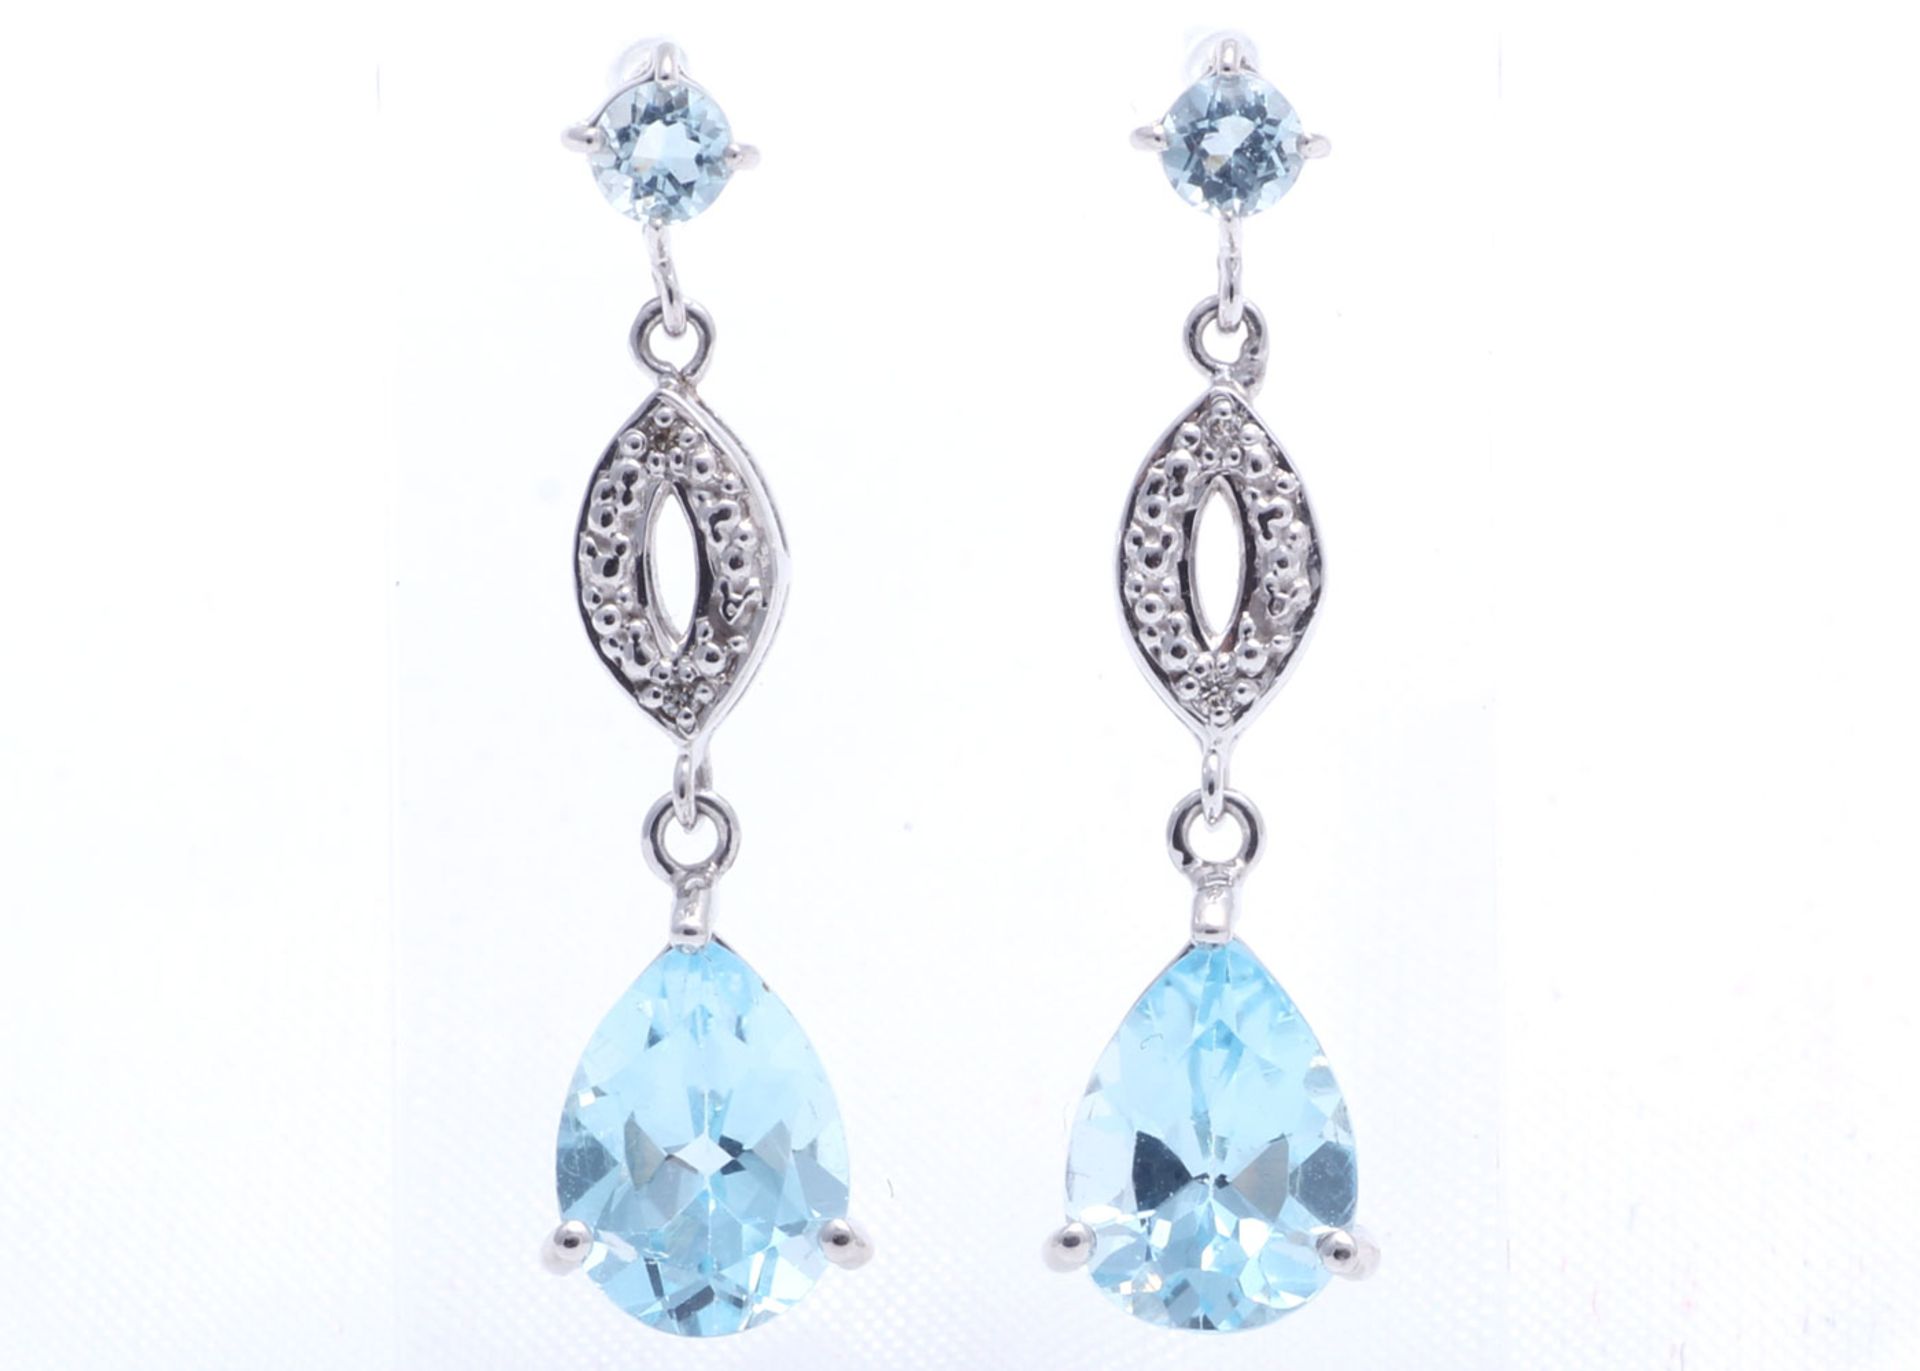 9k White Gold Diamond And Blue Topaz Earring 0.02 Carats